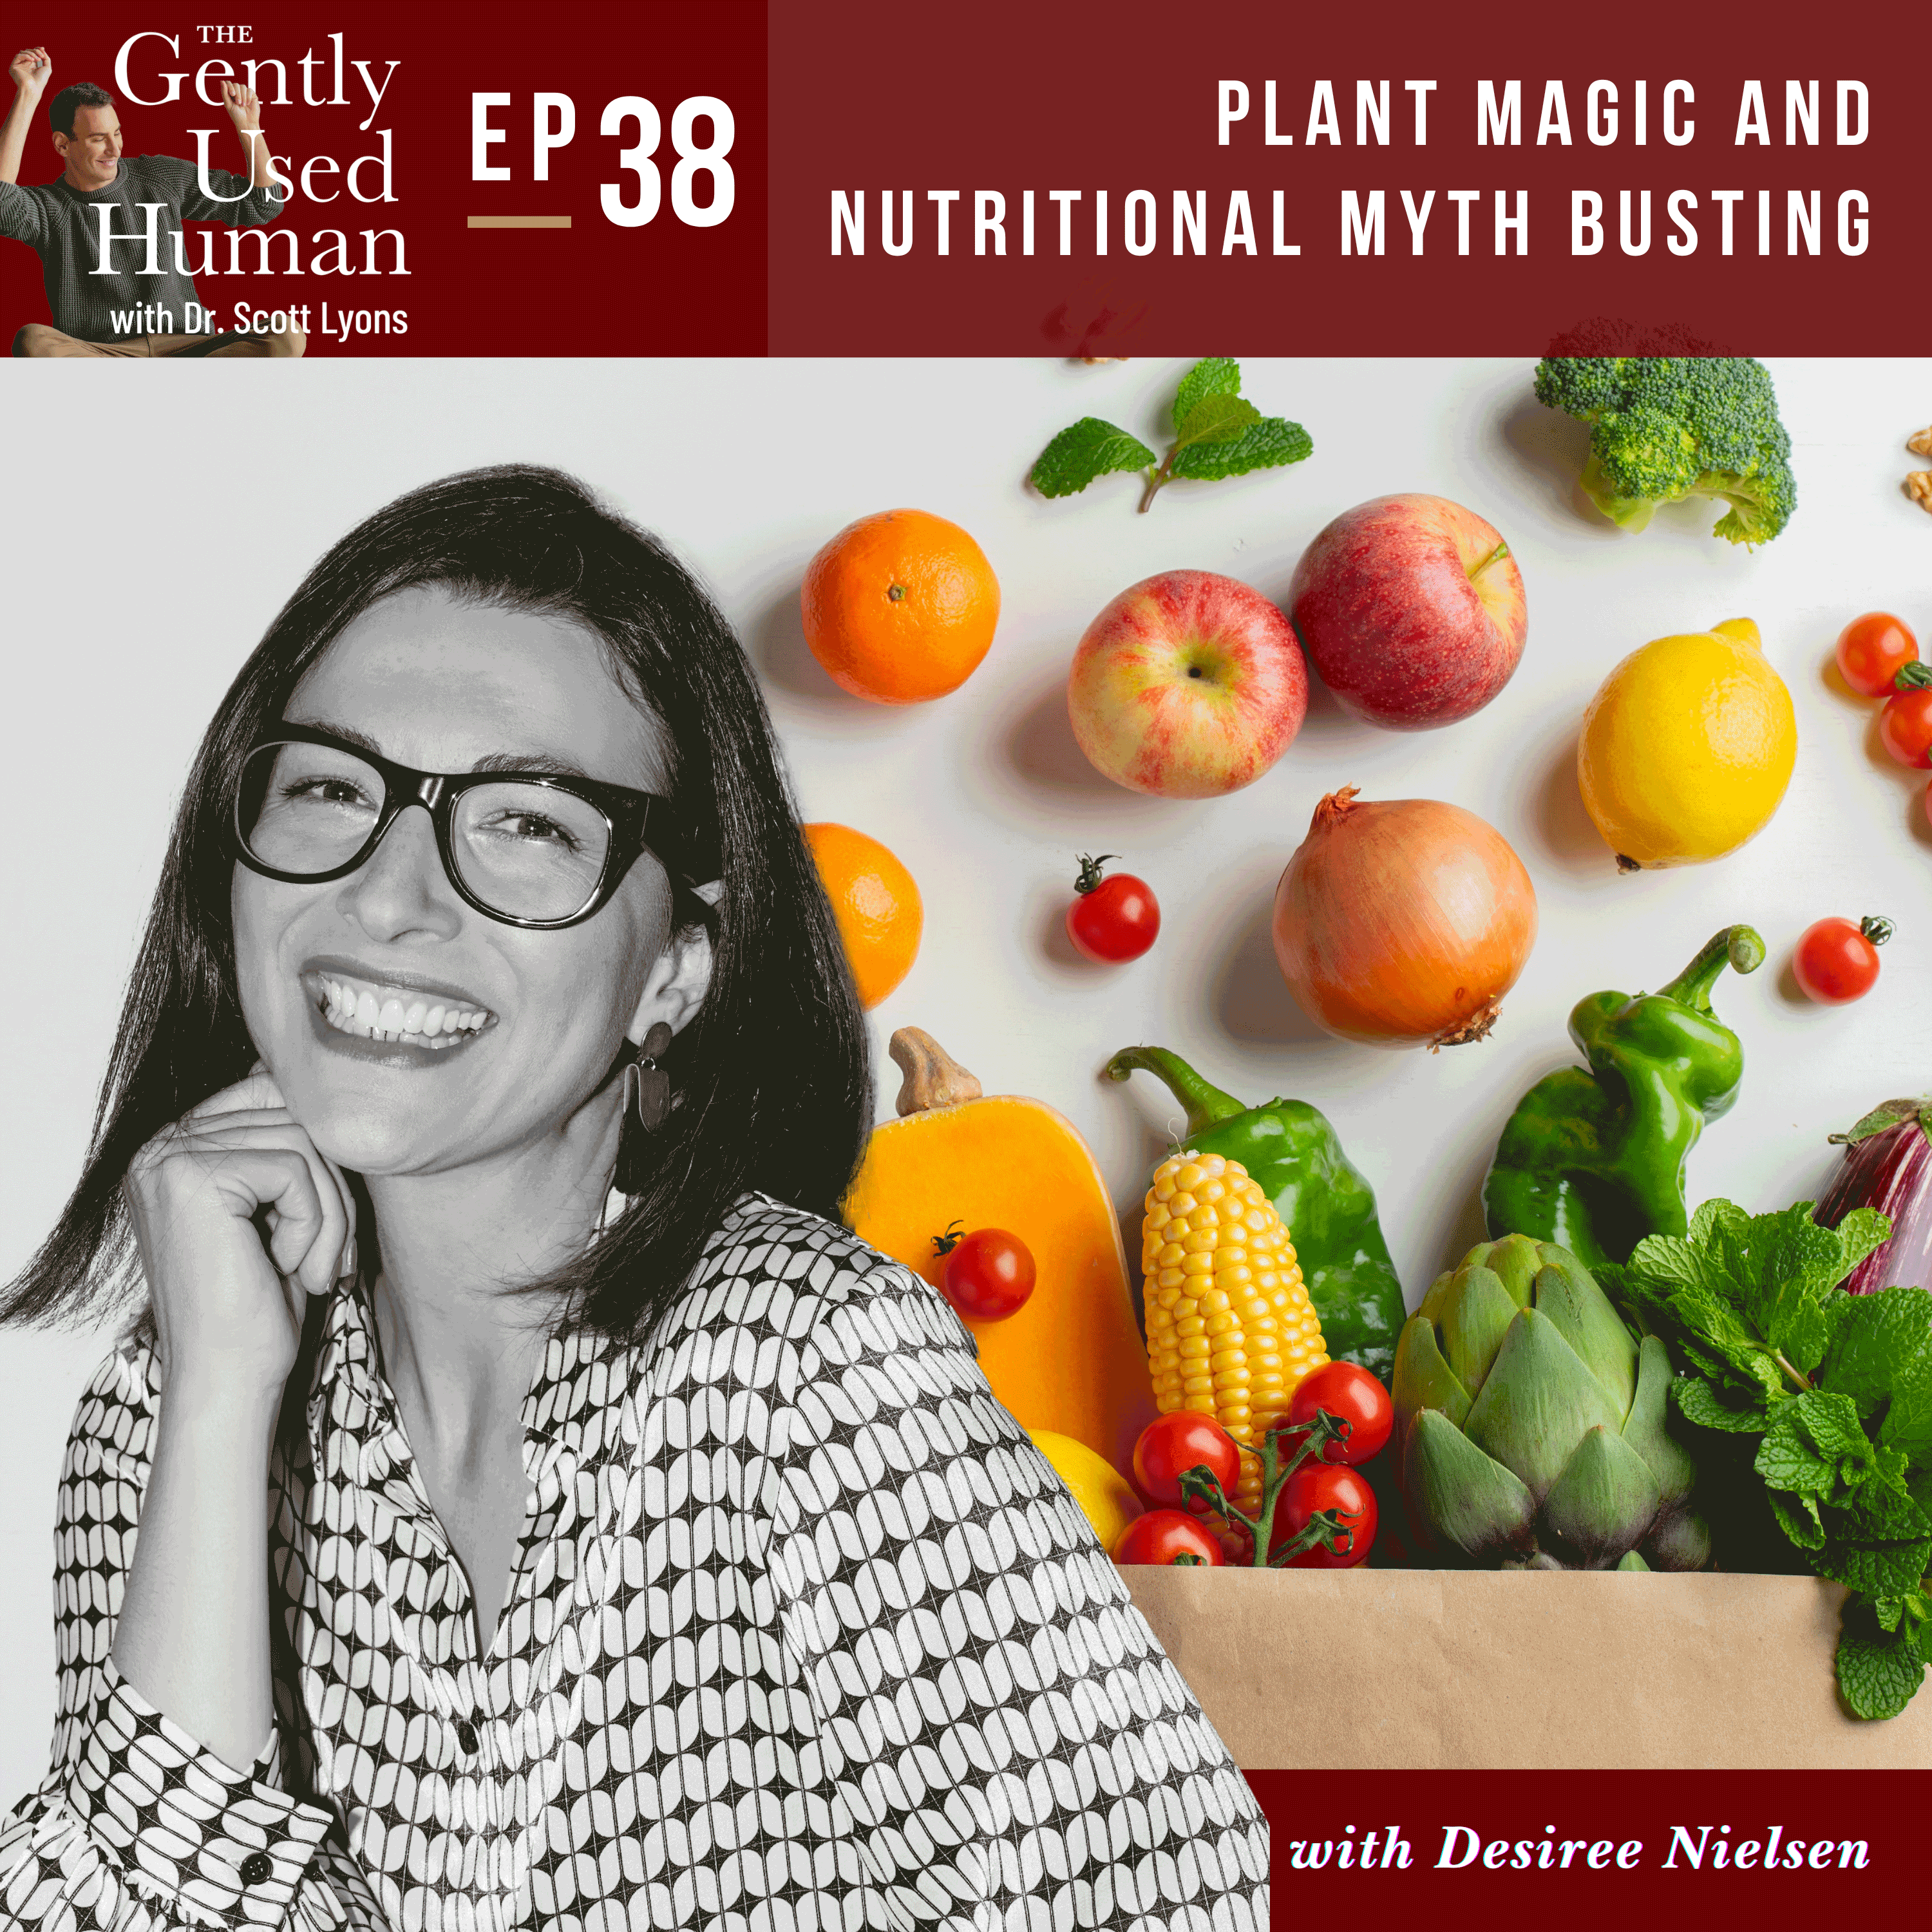 Plant Magic and Nutritional Myth Busting with Desiree Nielsen